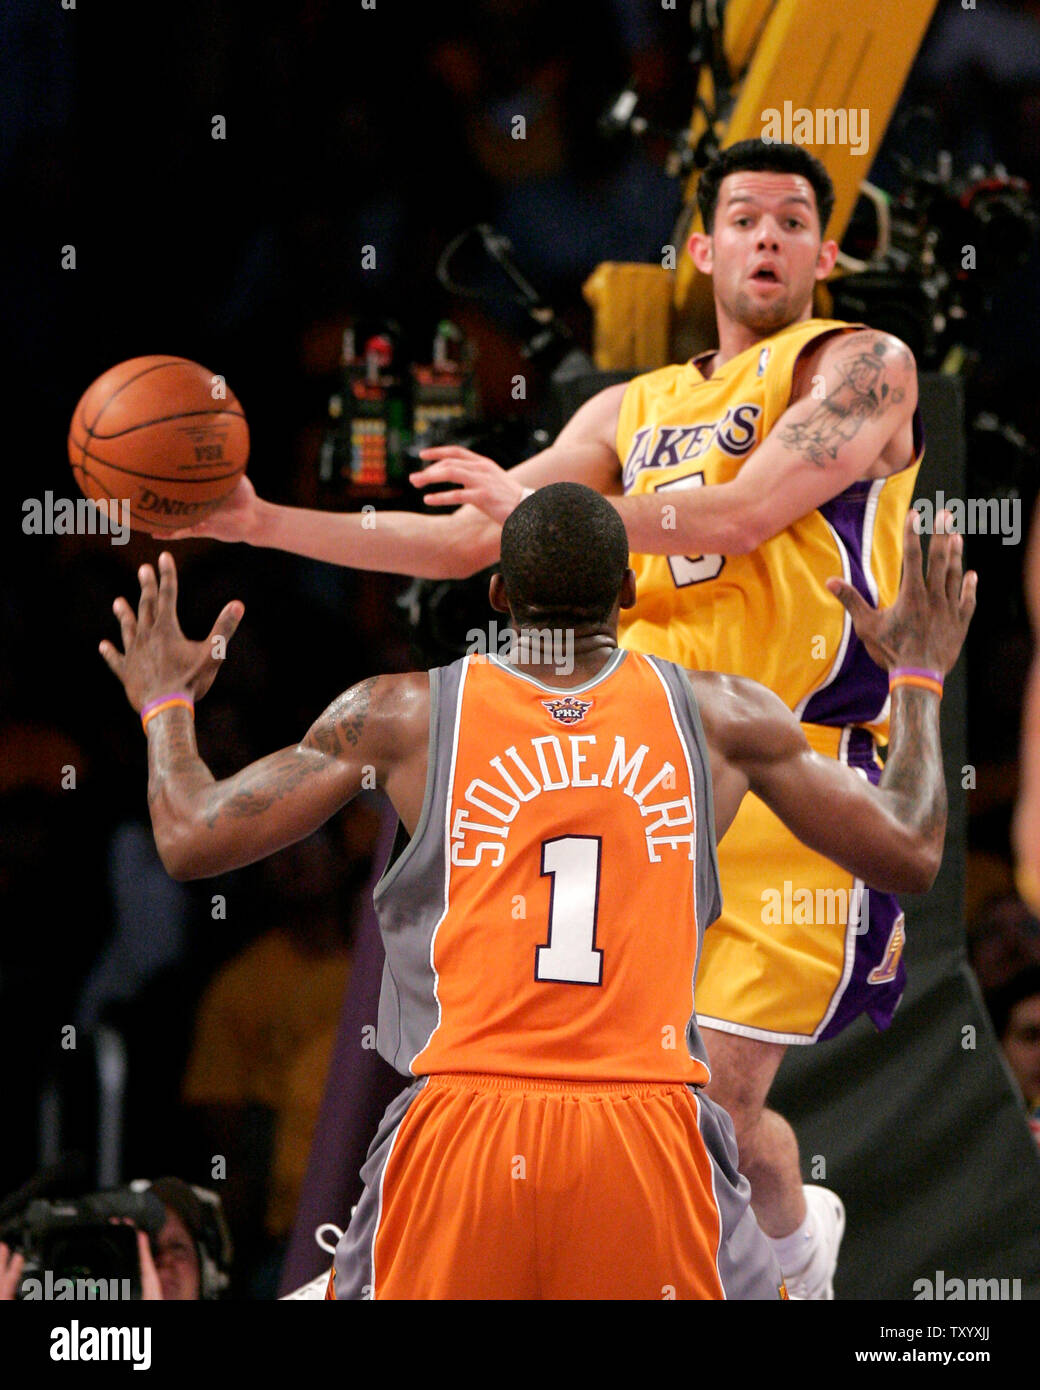 Los Angeles Lakers' Jordan Farmar drives the baseline against Houston  Rockets' Chuck Hayes during Game 5 of their Western Conference semifinals  at Staples Center in Los Angeles on May 12, 2009. The